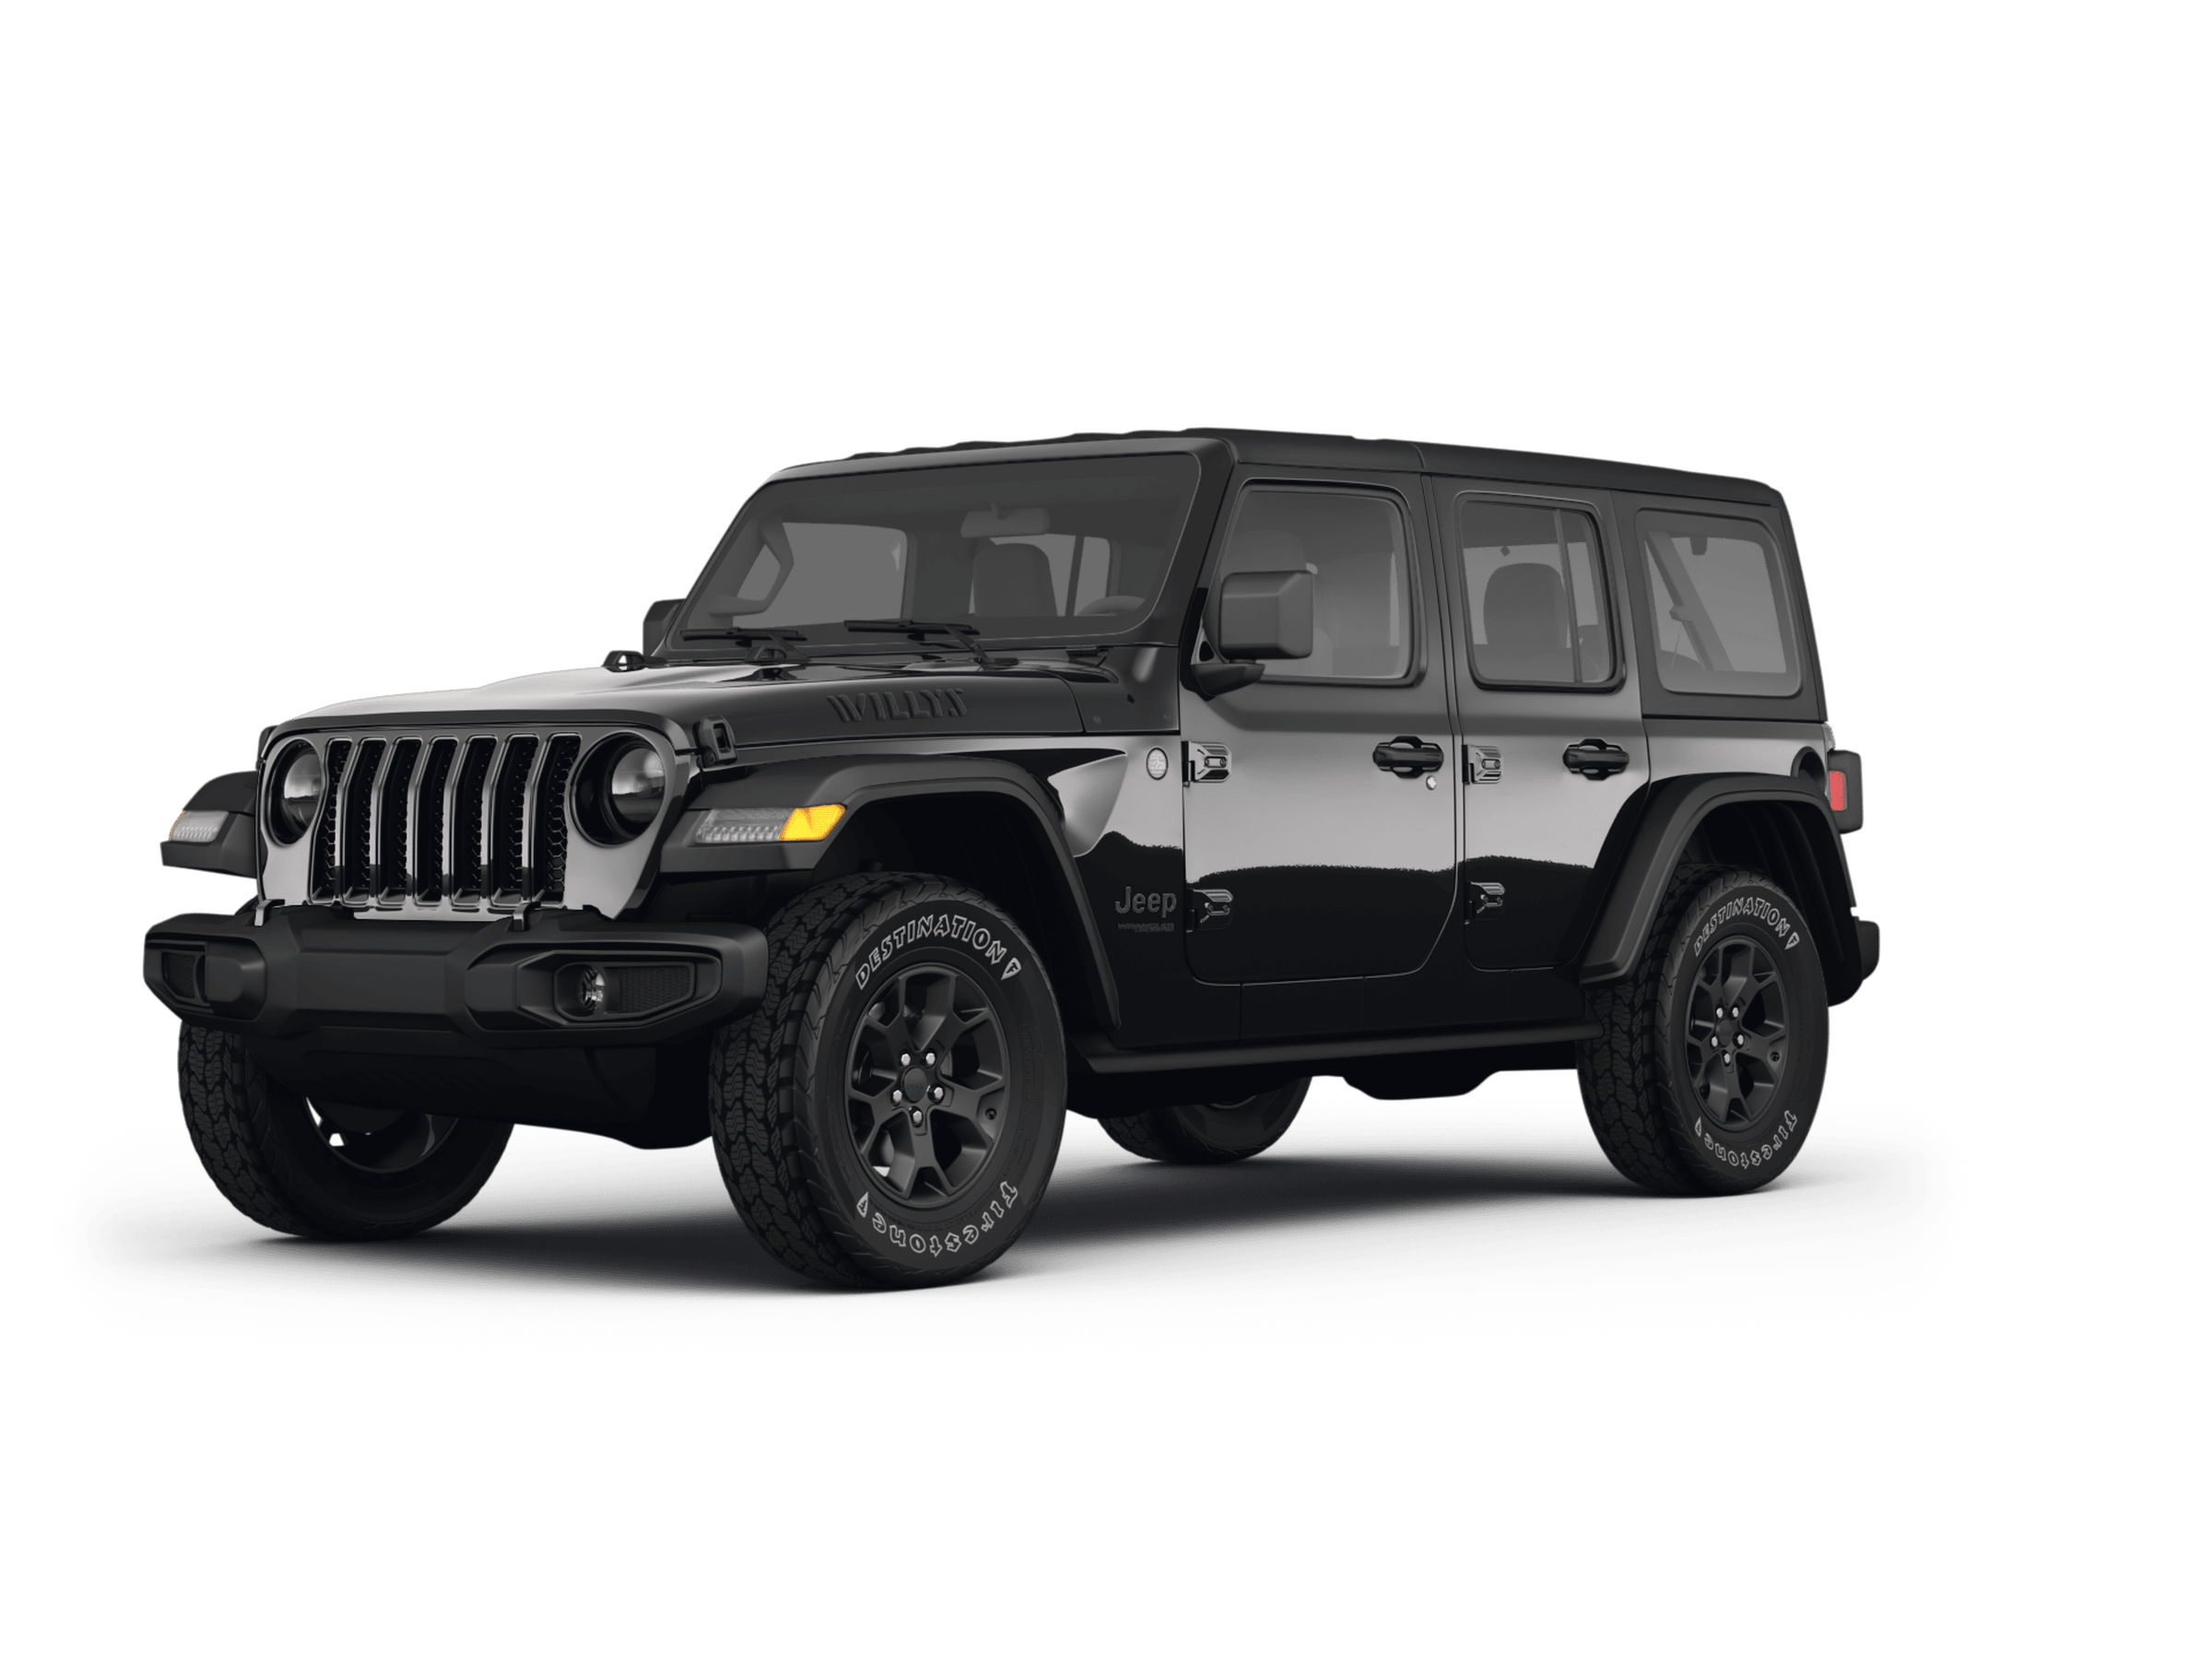 New Plug-in Hybrid Jeep Wrangler Vehicles For Sale | Driveway